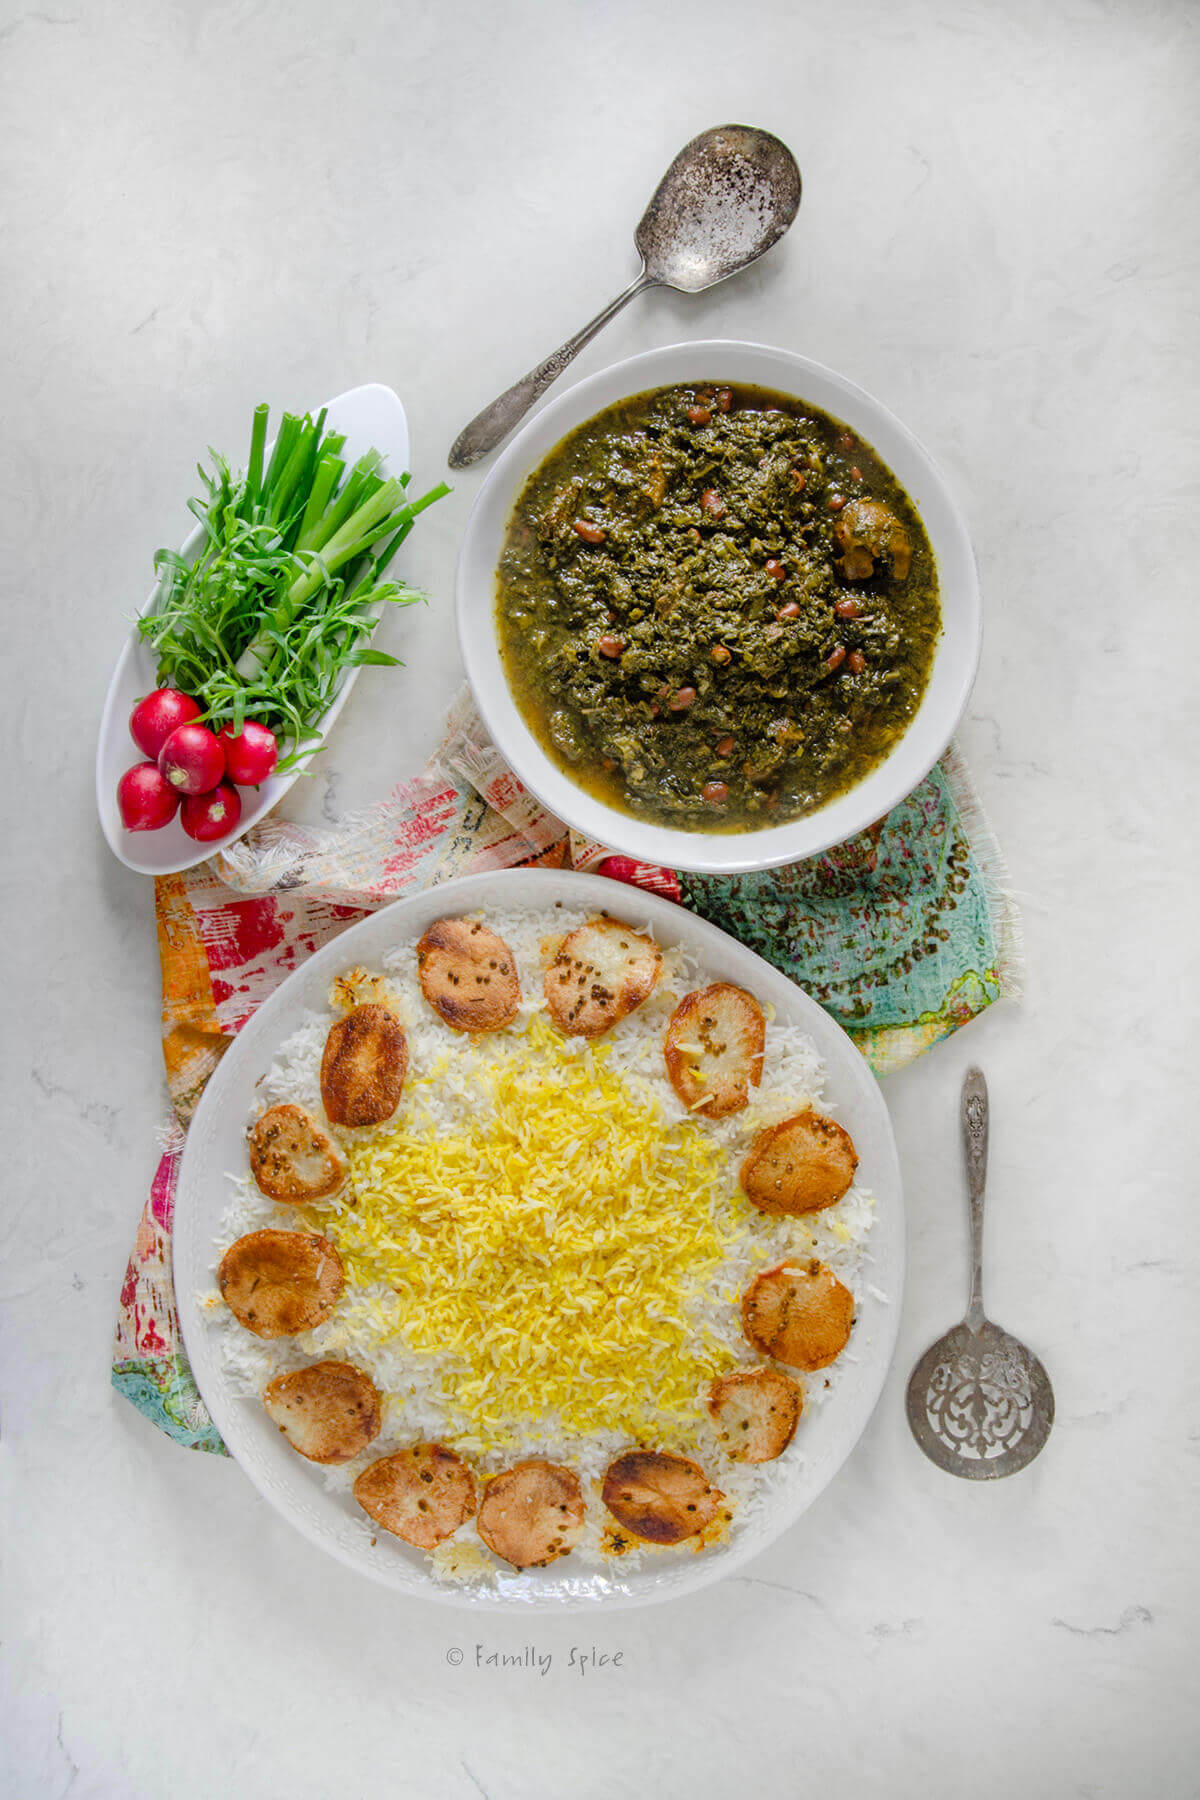 Top view of Persian rice on a platter, ghormeh sabzi in a bowl and fresh radishes and herbs